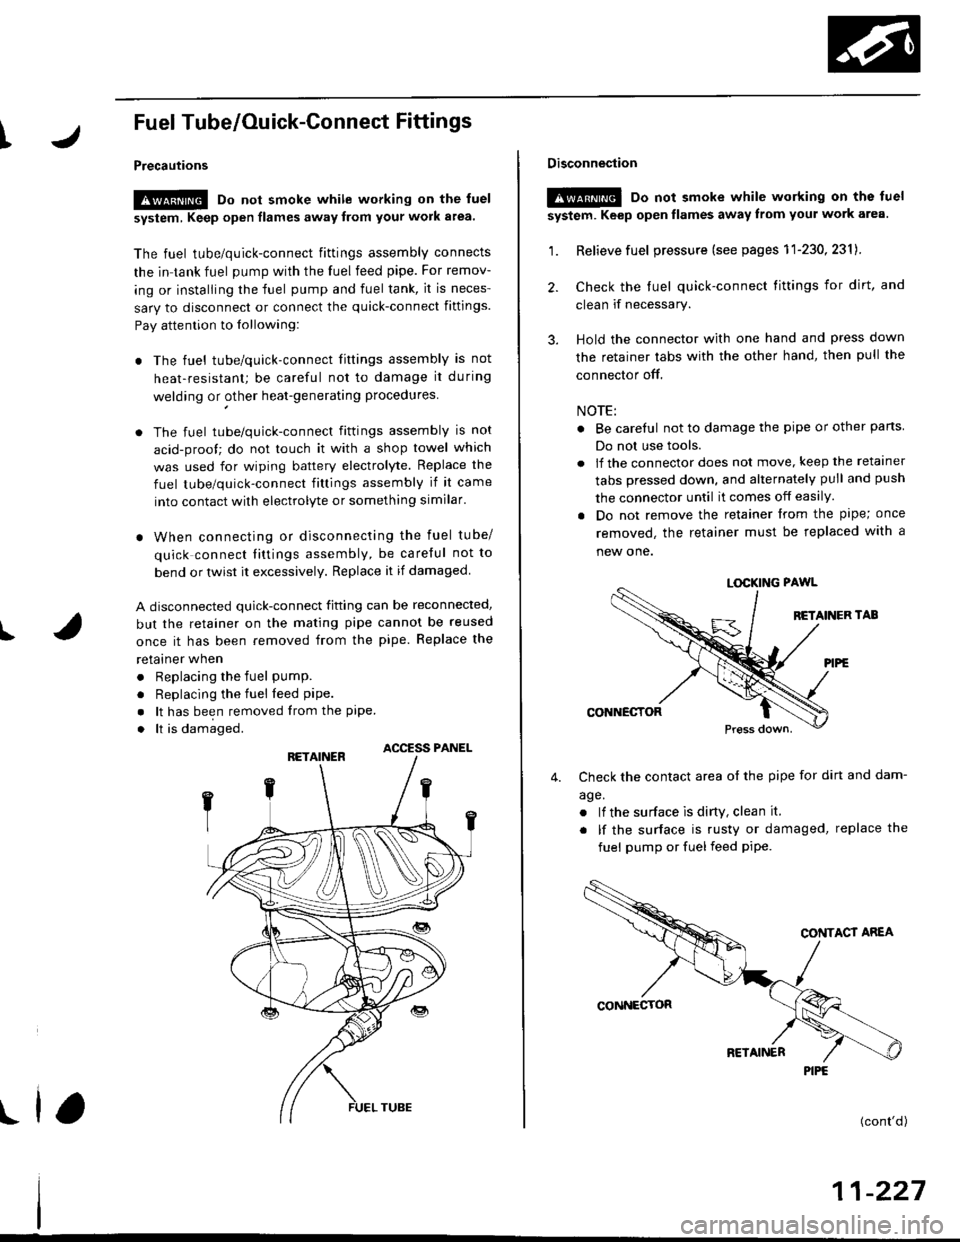 HONDA CIVIC 1997 6.G Workshop Manual I
Fuel Tube/Ouick-Gonnect Fittings
Precautions
!@ Do not smoke while working on the fuel
system, Keep open flames away from your work a.ea
The fuel tube/quick-connect fittings assembly connects
the i